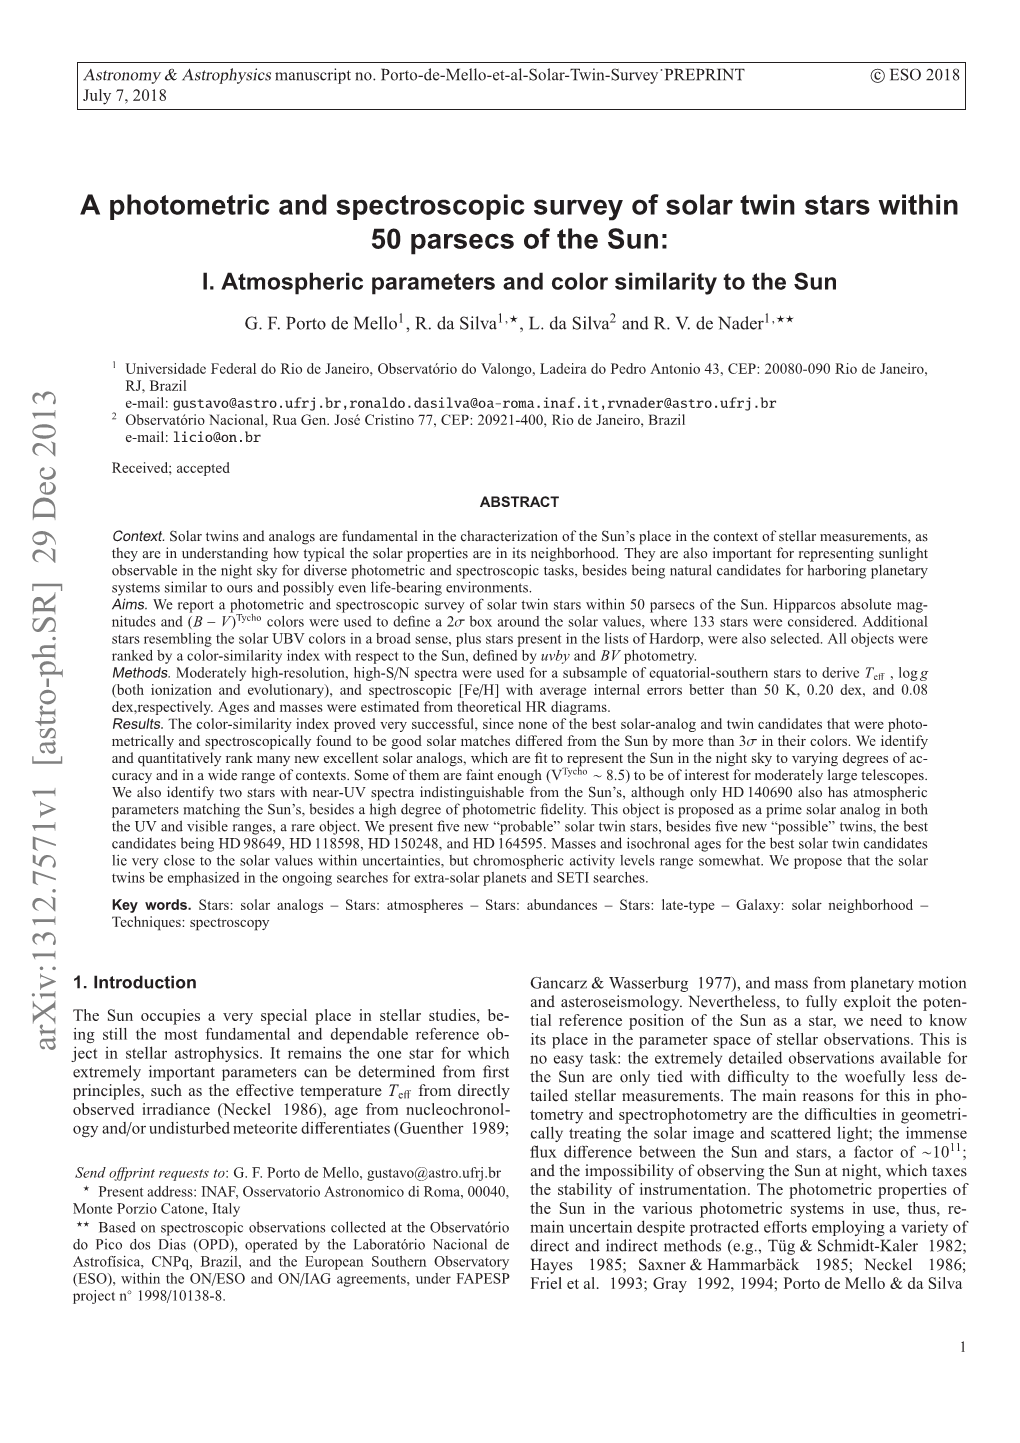 A Photometric and Spectroscopic Survey of Solar Twin Stars Within 50